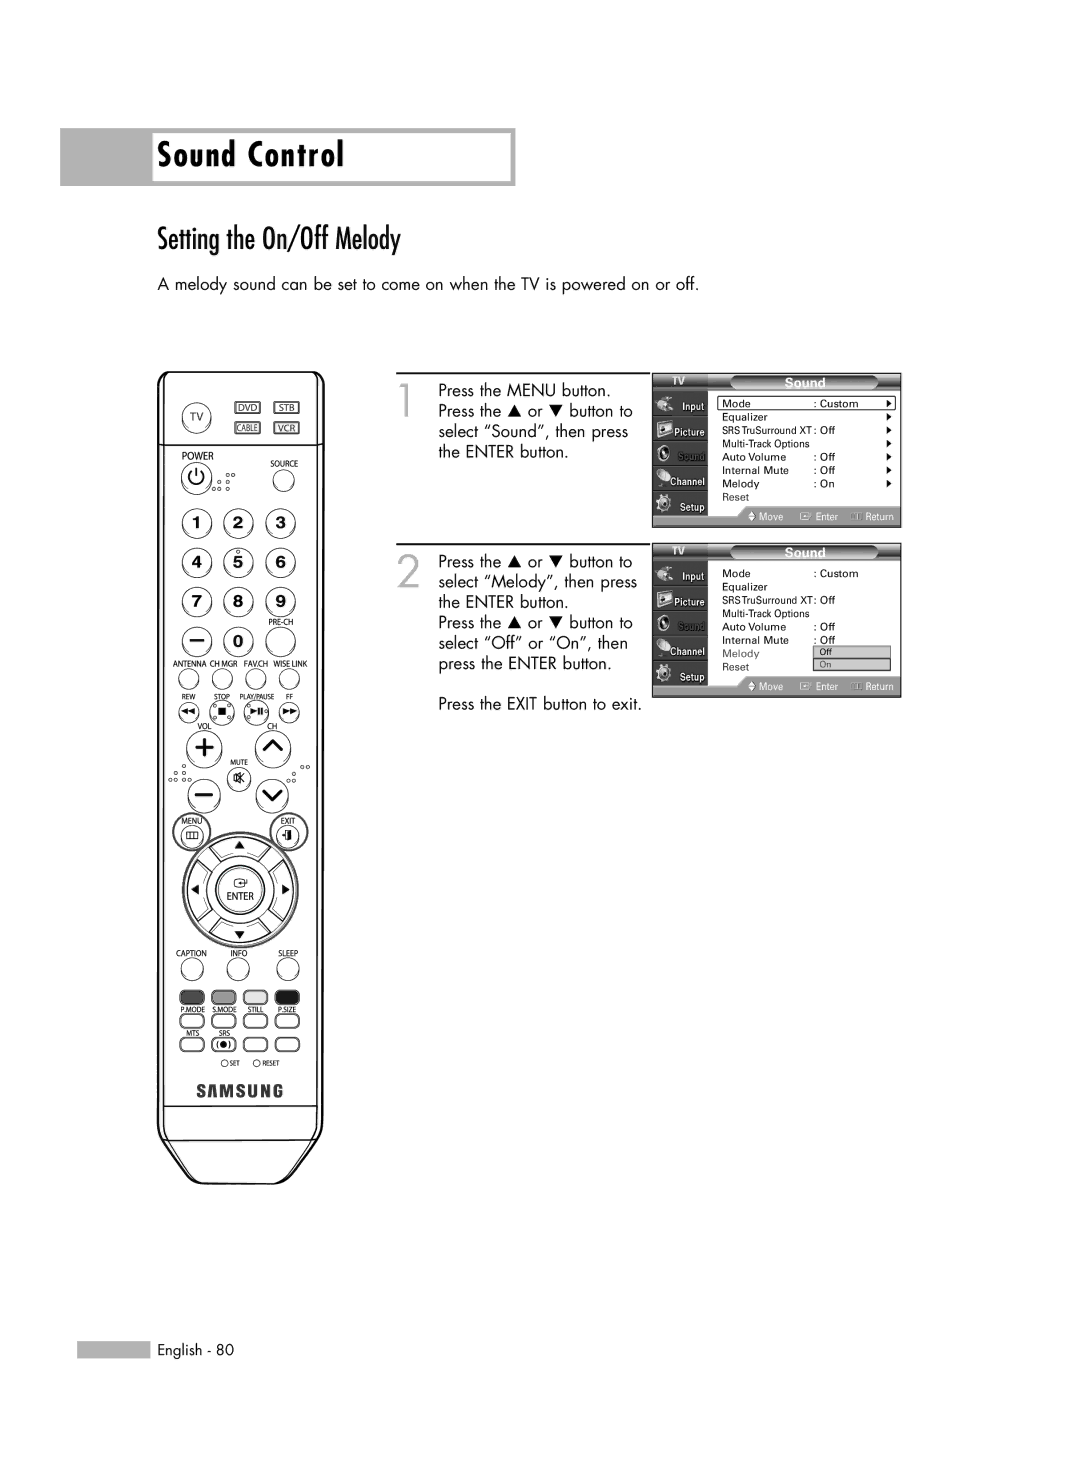 Samsung HL-S6166W, HL-S5066W, HL-S4666W, HL-S5666W manual Setting the On/Off Melody 